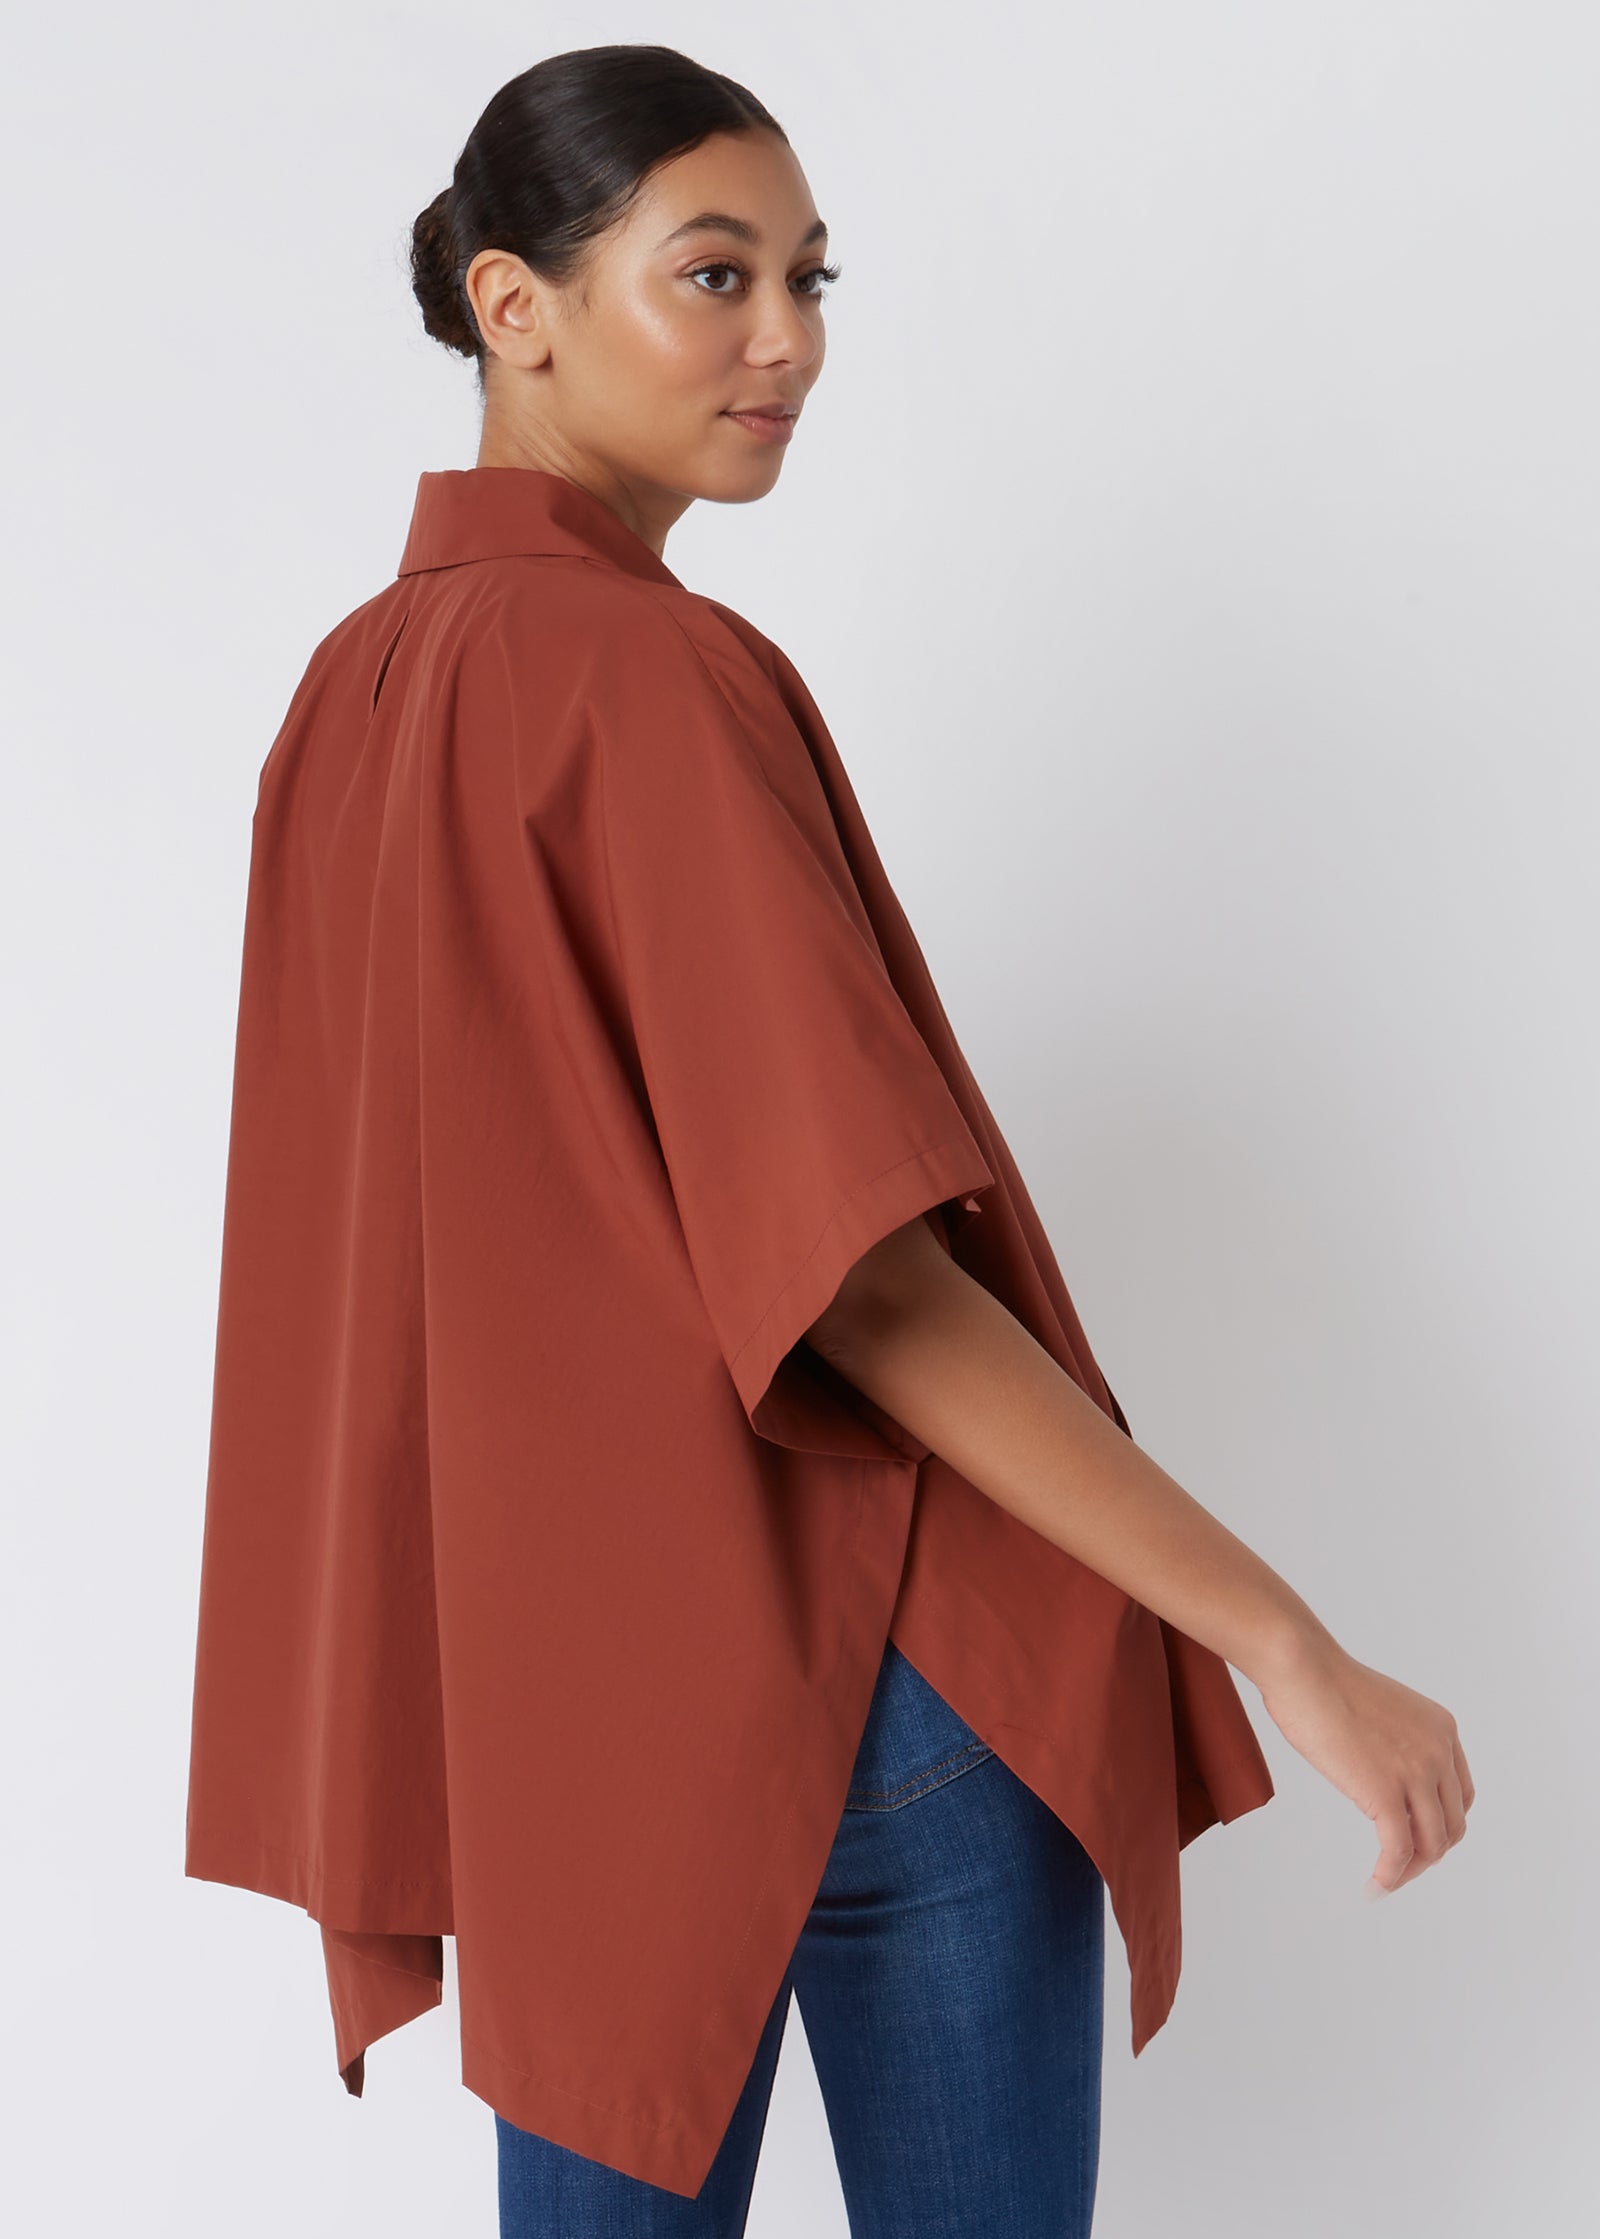 Kal Rieman Pocket Poncho in Rust Italian Broadcloth on Model with Hands in Pockets Cropped Front View